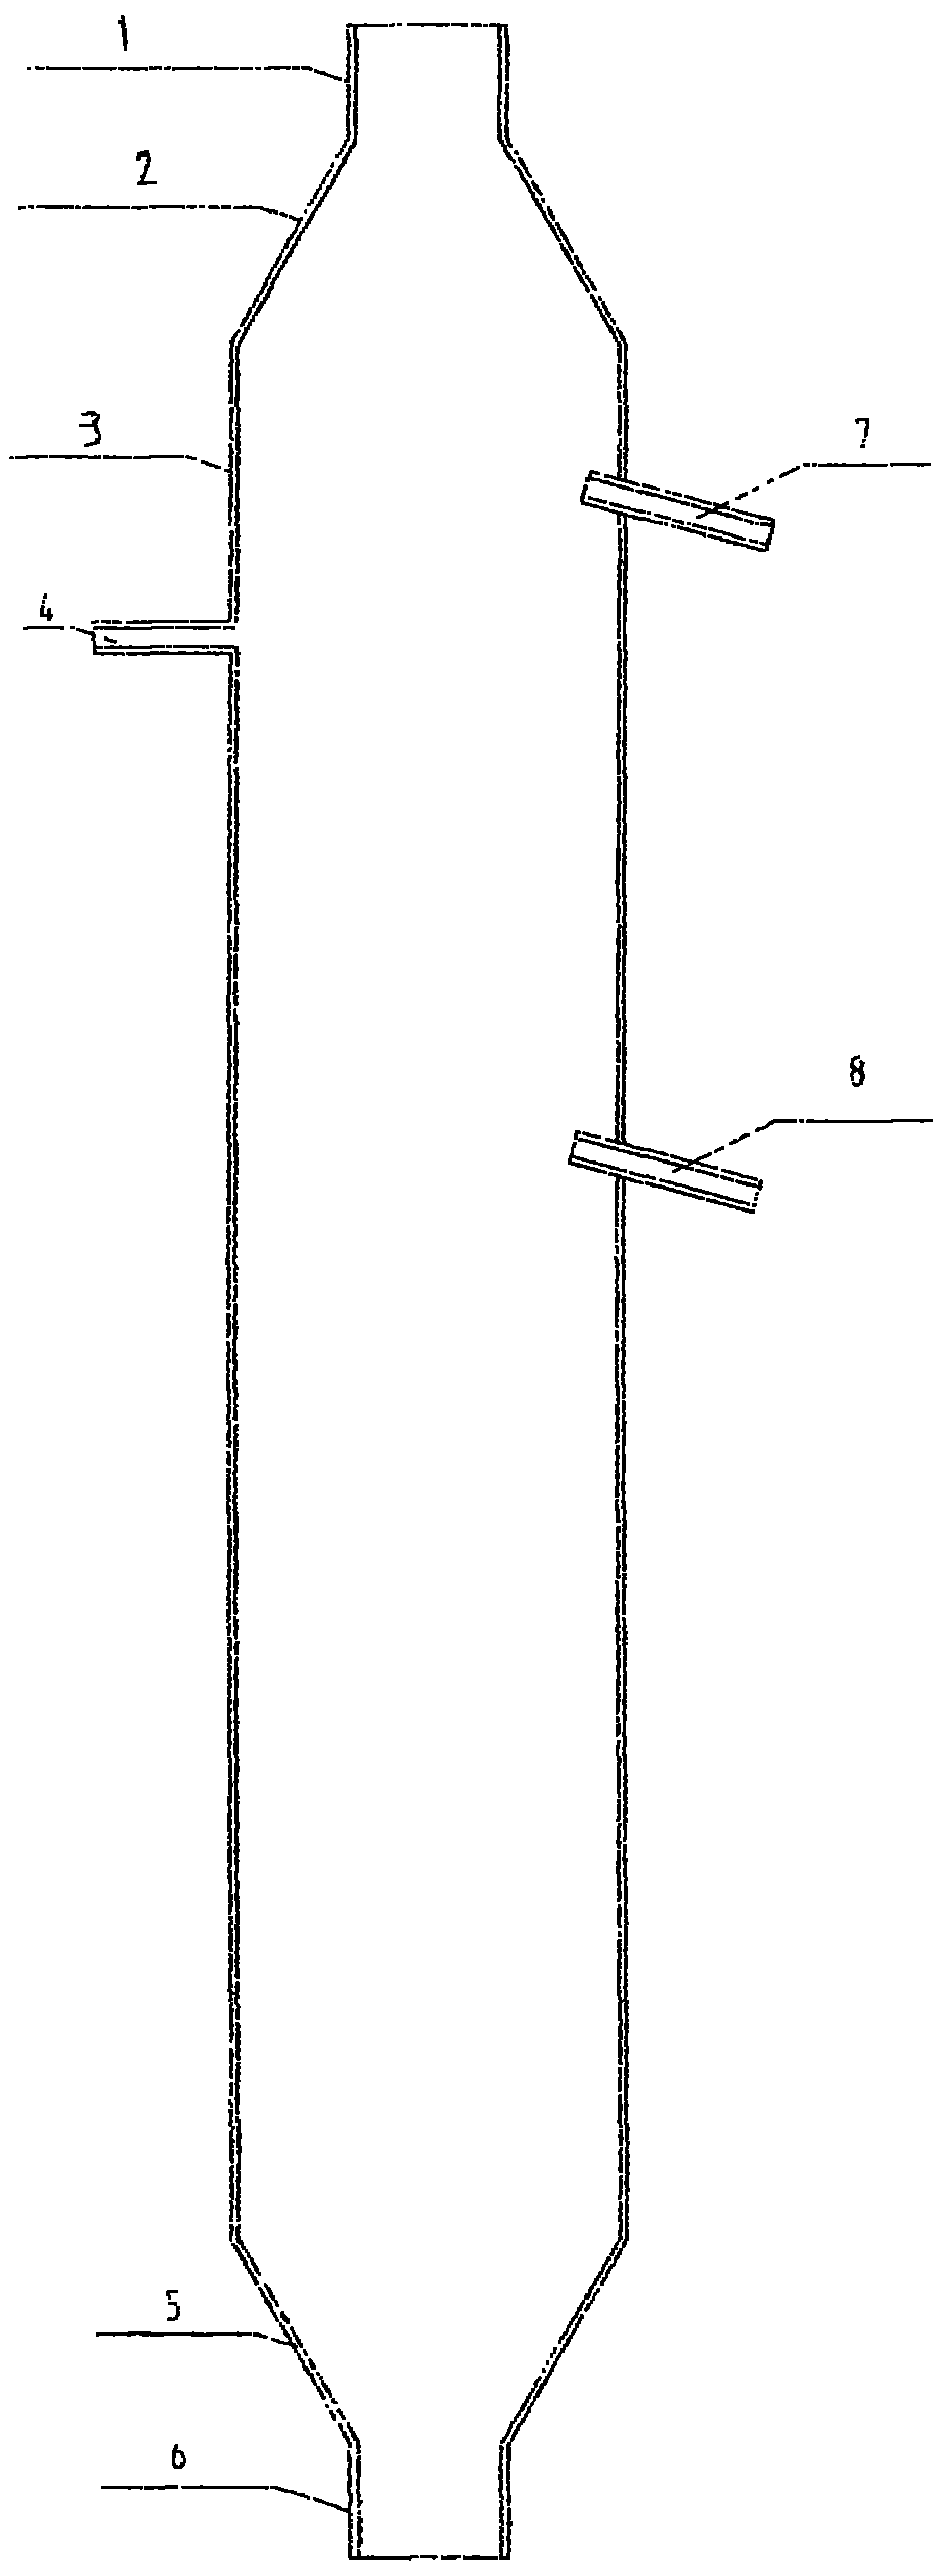 Fine particle aggregating device under aggregating agent and jet effects